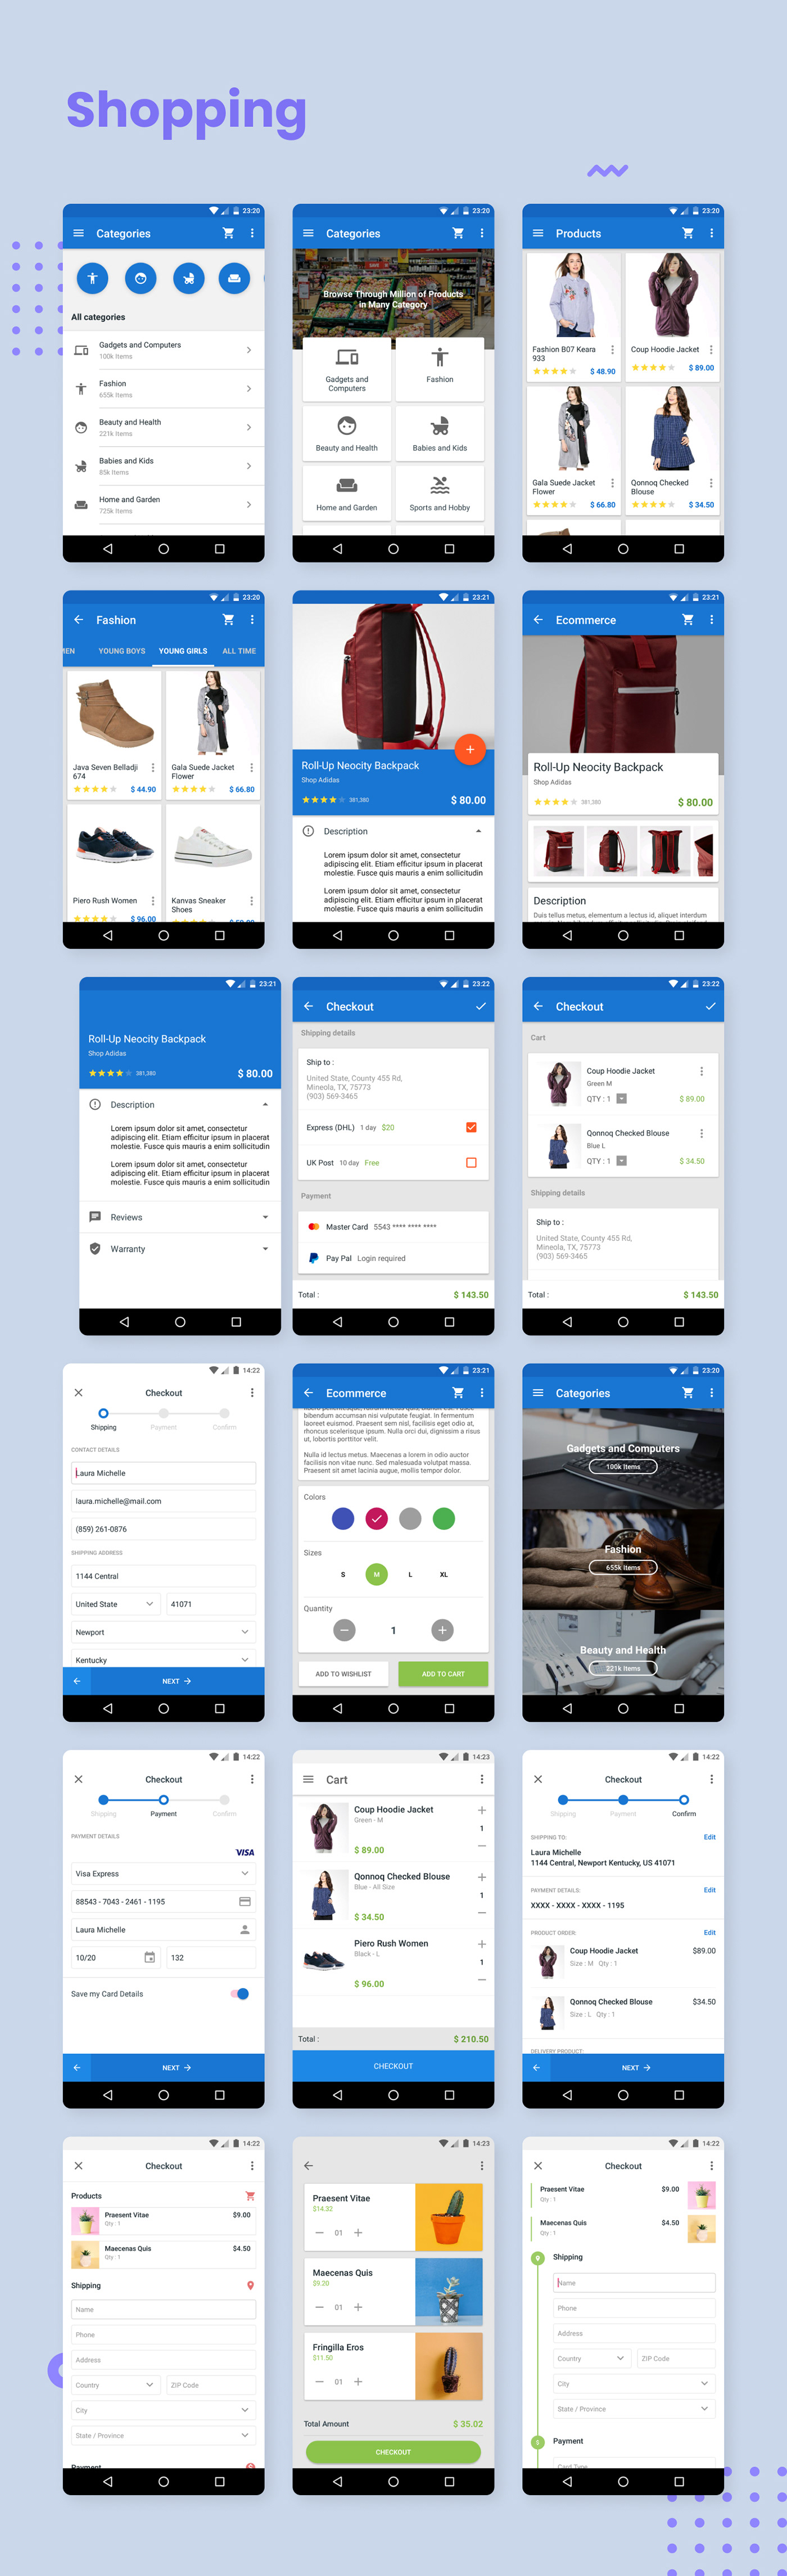 MaterialX - Interface do Android Material Design 2.8 - 28